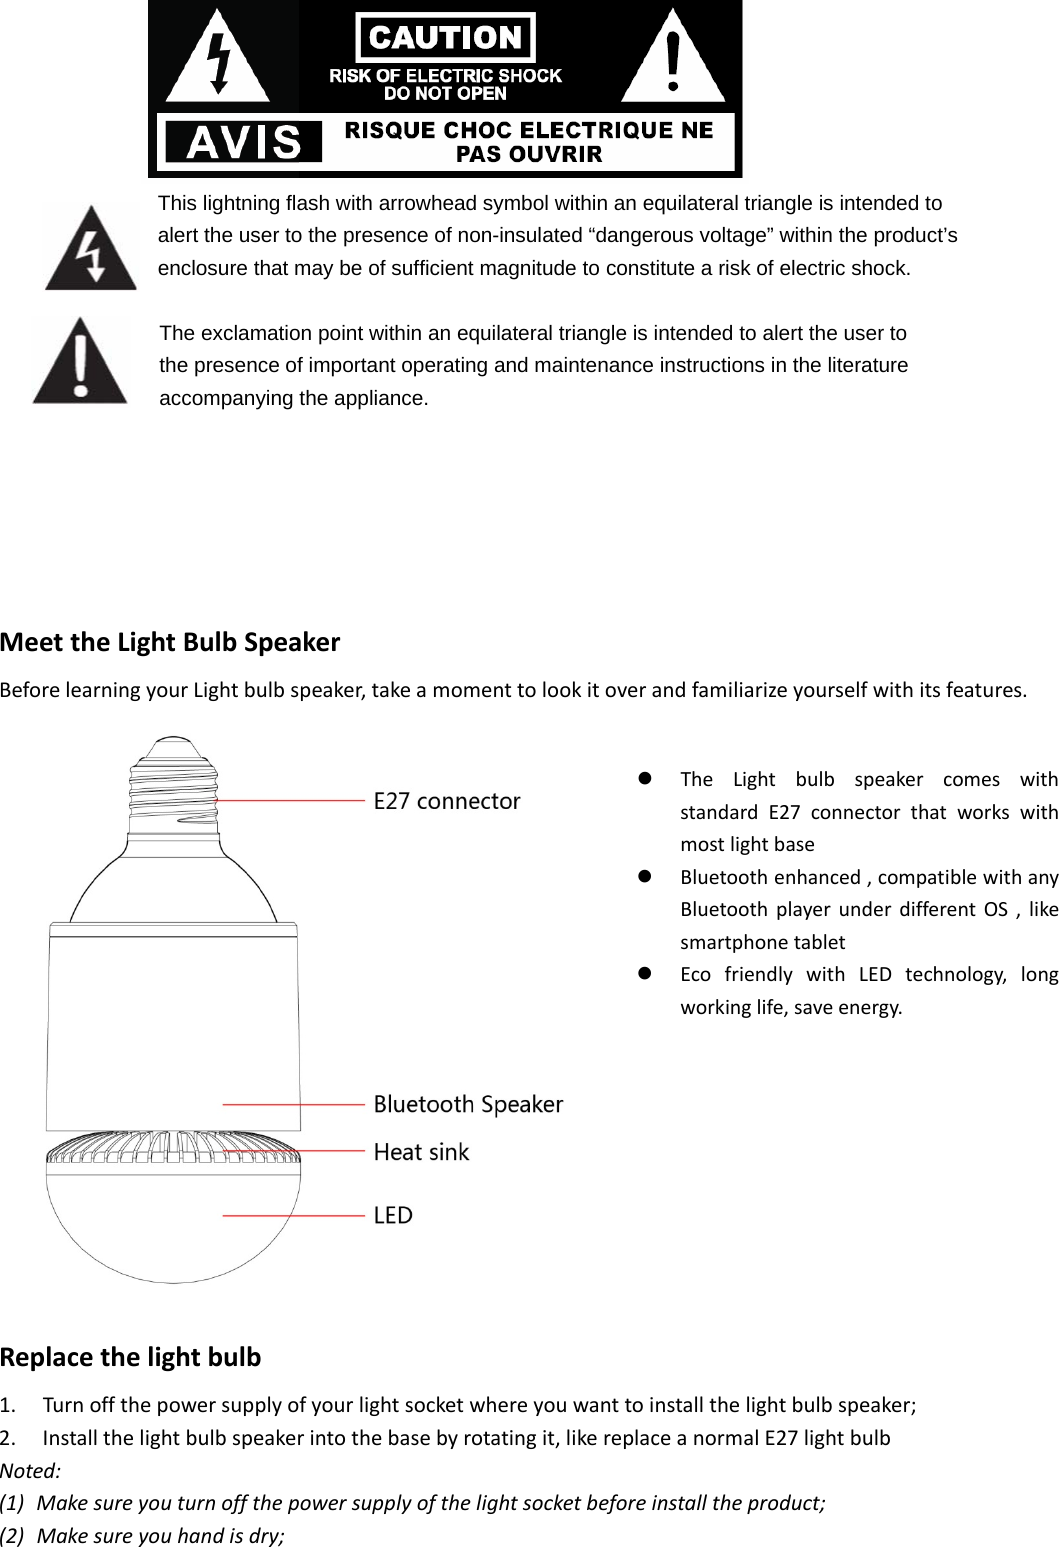   This lightning flash with arrowhead symbol within an equilateral triangle is intended to alert the user to the presence of non-insulated “dangerous voltage” within the product’s enclosure that may be of sufficient magnitude to constitute a risk of electric shock.           The exclamation point within an equilateral triangle is intended to alert the user to the presence of important operating and maintenance instructions in the literature accompanying the appliance.   MeettheLightBulbSpeakerBeforelearningyourLightbulbspeaker,takeamomenttolookitoverandfamiliarizeyourselfwithitsfeatures.Replacethelightbulb1. Turnoffthepowersupplyofyourlightsocketwhereyouwanttoinstallthelightbulbspeaker;2. Installthelightbulbspeakerintothebasebyrotatingit,likereplaceanormalE27lightbulbNoted:(1) Makesureyouturnoffthepowersupplyofthelightsocketbeforeinstalltheproduct;(2) Makesureyouhandisdry;z TheLightbulbspeakercomeswithstandardE27connectorthatworkswithmostlightbasez Bluetoothenhanced,compatiblewithanyBluetoothplayerunderdifferentOS,likesmartphonetabletz EcofriendlywithLEDtechnology,longworkinglife,saveenergy.